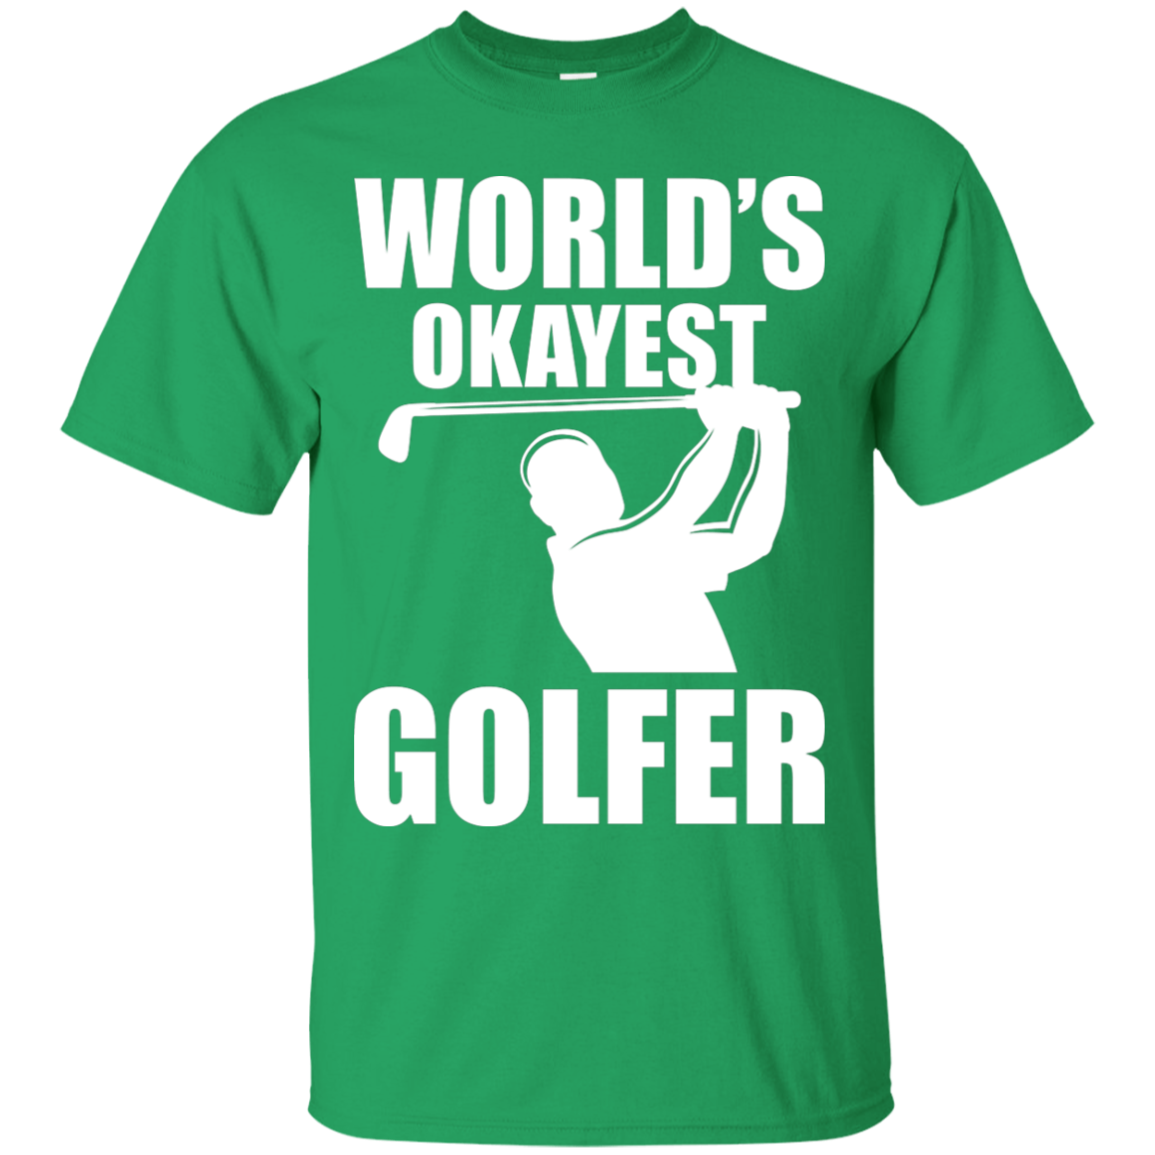 World's Okayest Golfer T-Shirt Apparel - The Beer Lodge